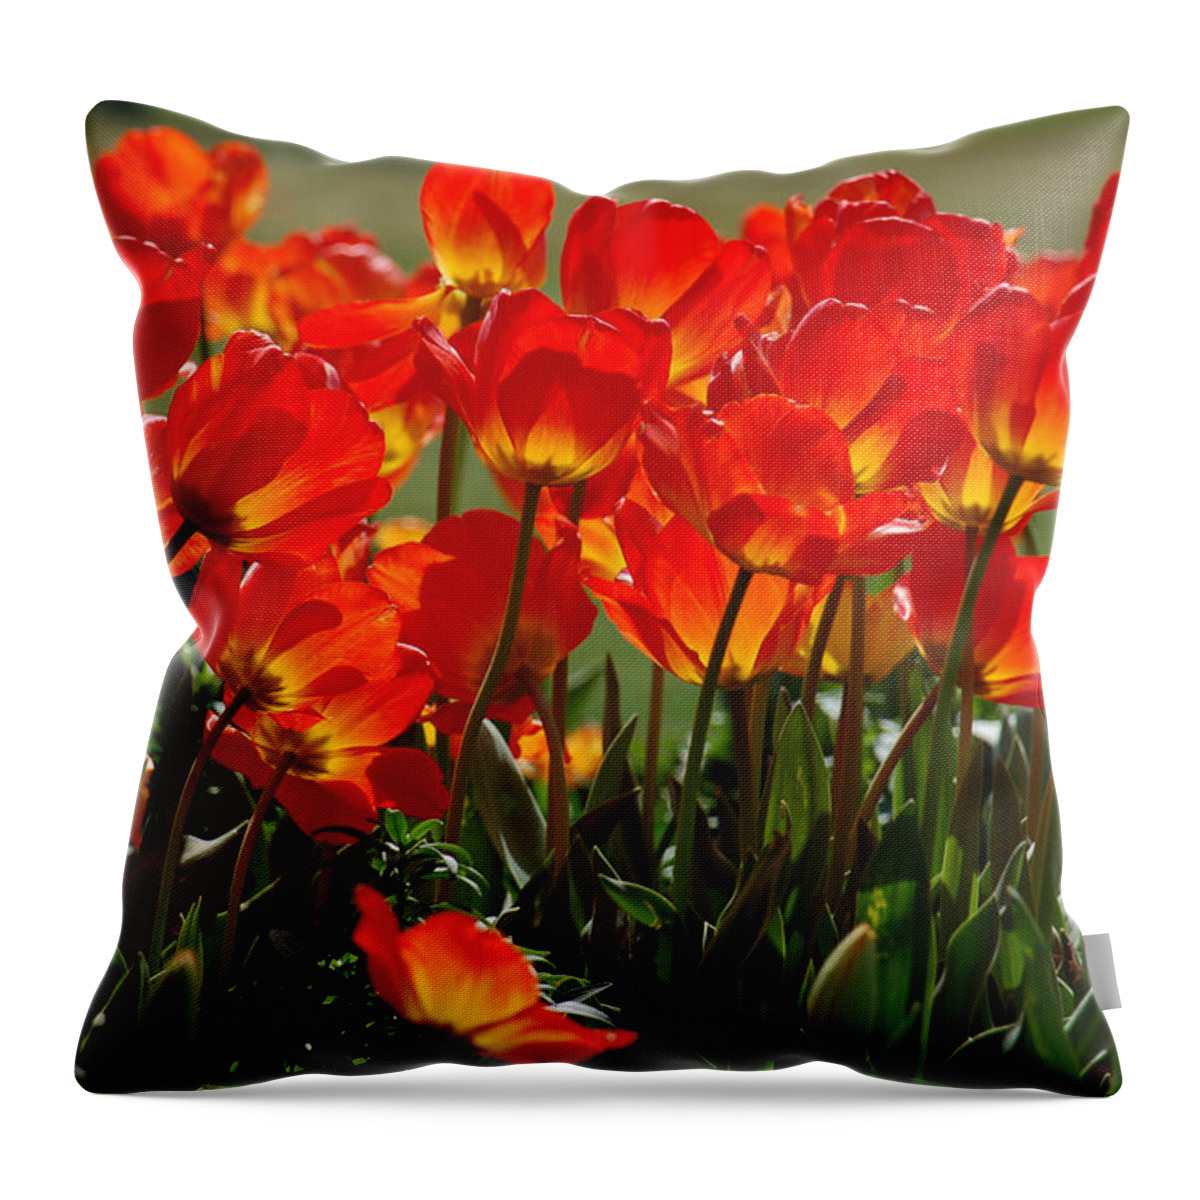 Orange Tulip Throw Pillow featuring the photograph Sun-Drenched Tulips by Suzanne Gaff